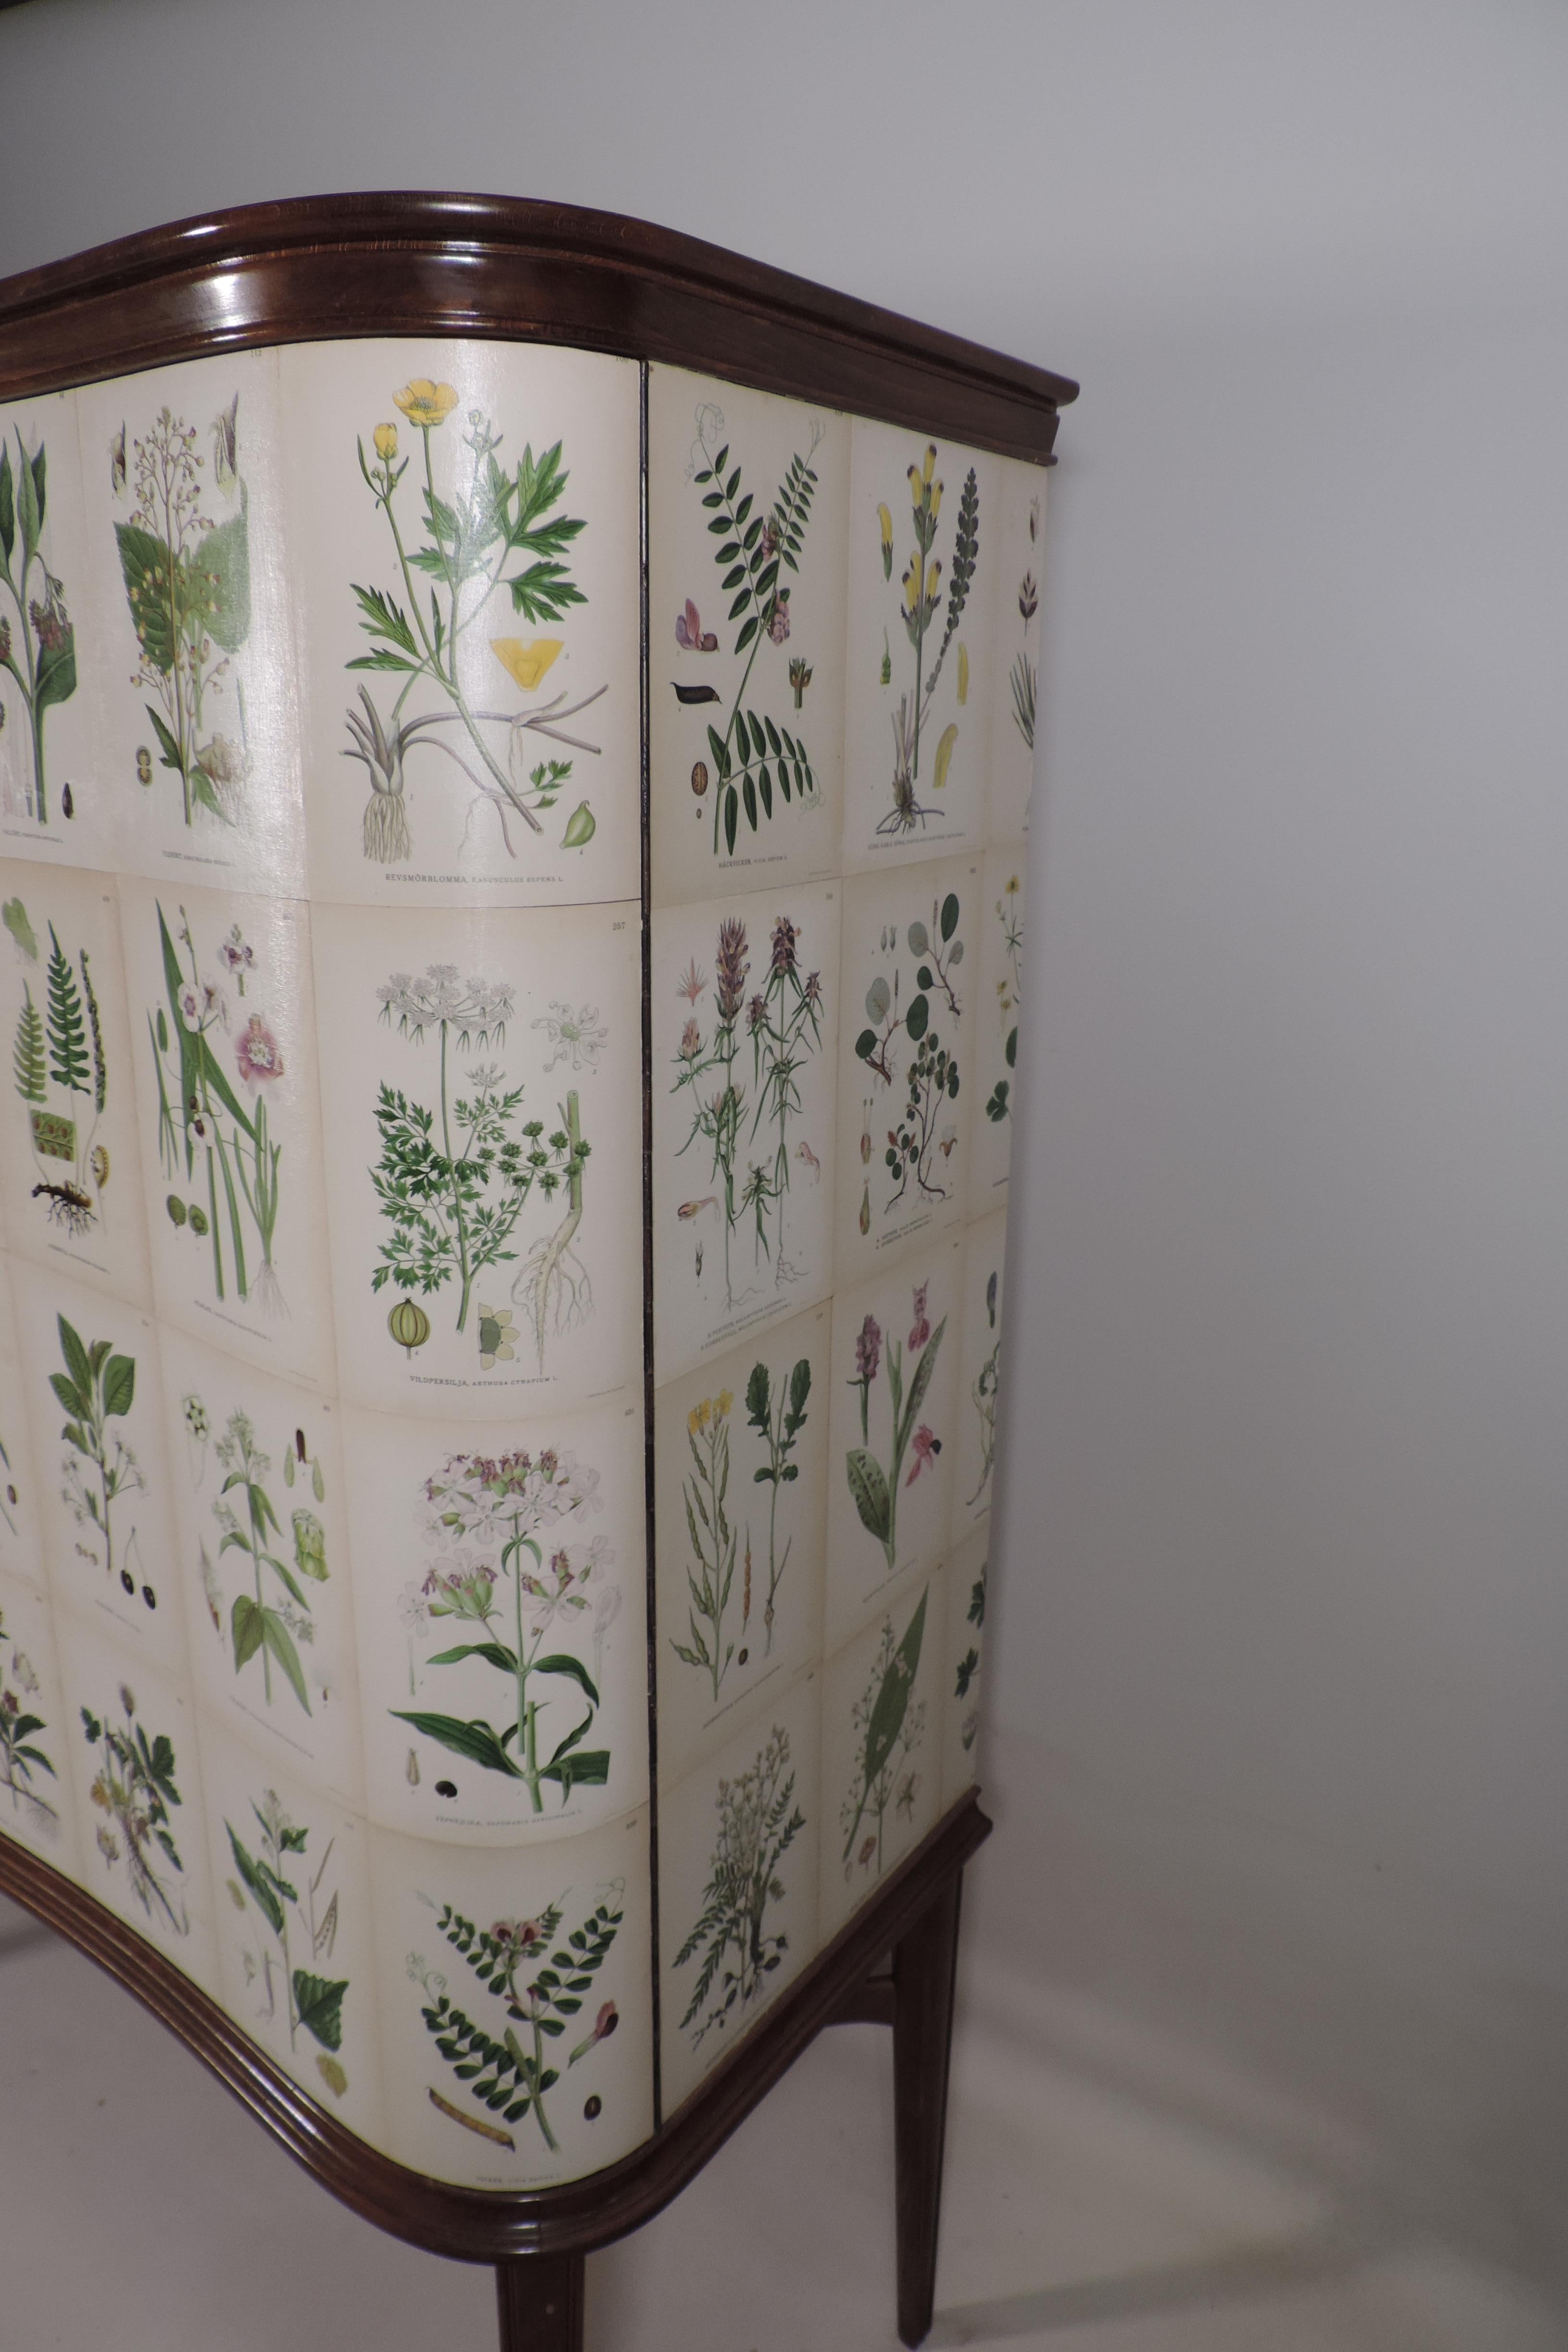 This fabulous Swedish vintage cabinet from the 1940s-1950s has been restyled in our studio to be covered in these amazing lithograph prints taken from C.A.M Lindman, Nordens Flora from 1926 then sealed with lacquer for protection. These are the same